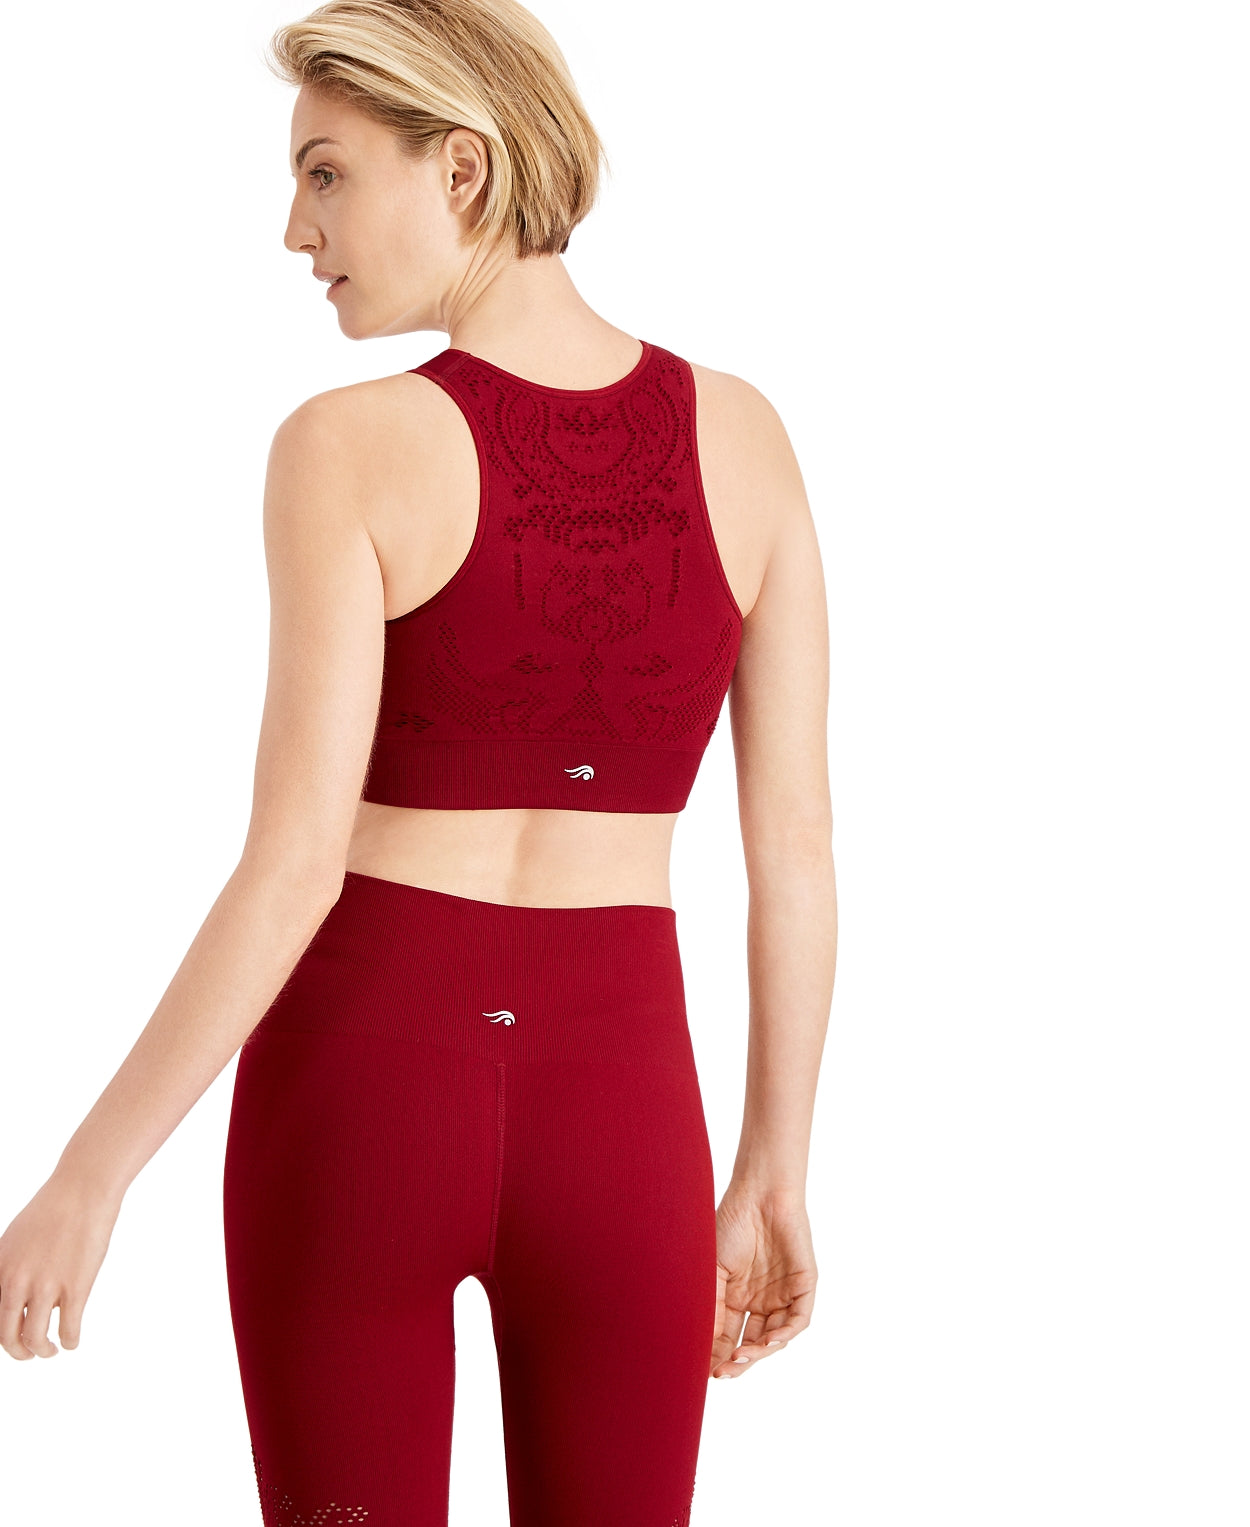 Ideology Womens Seamless Perforated Mid Impact Sports Bra Color Cherry Pie